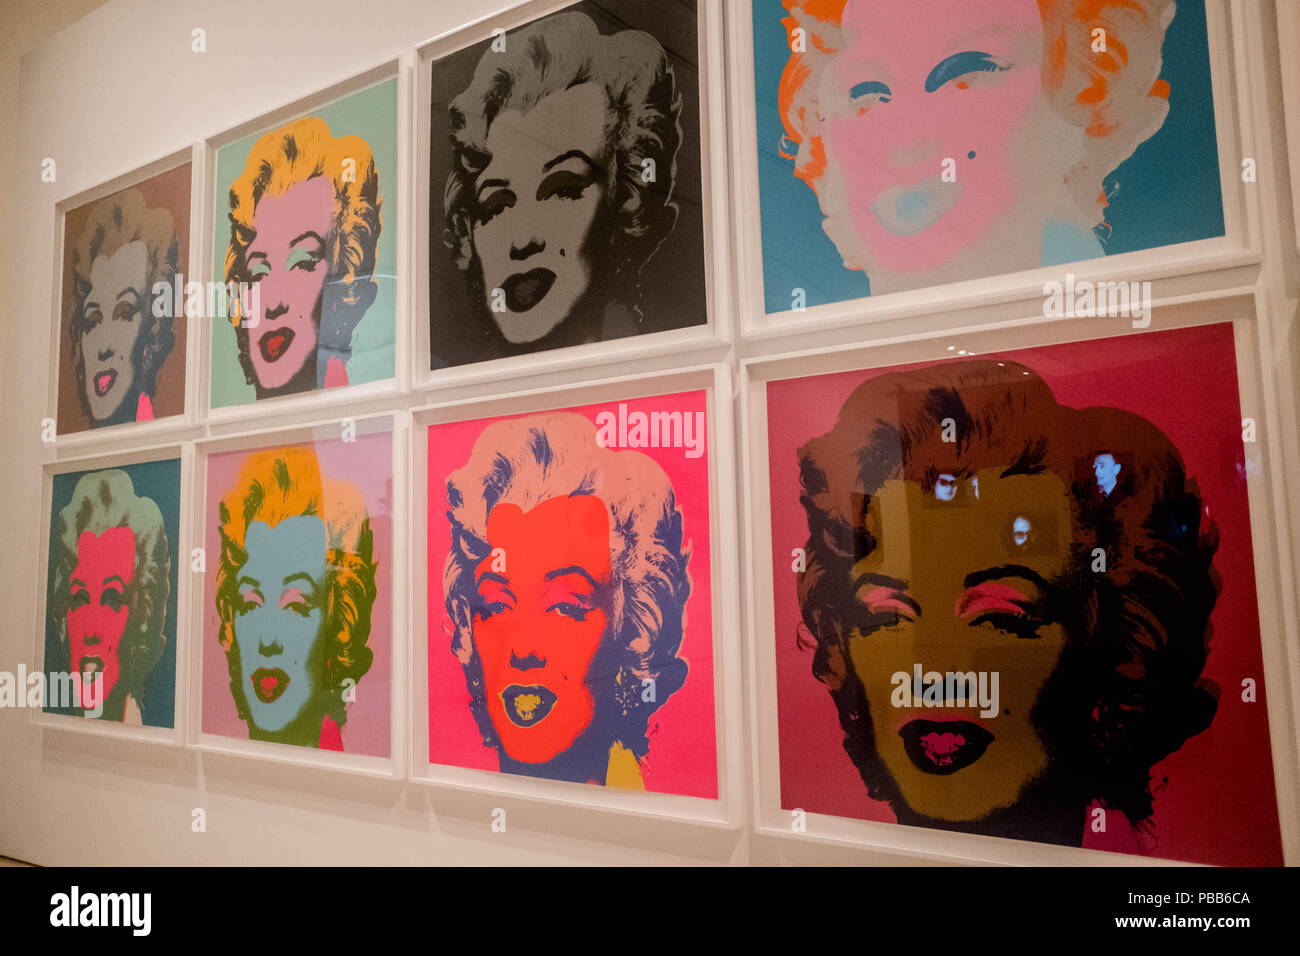 Andy Warhol exhibition held in Malaga, Spain, on July 2018 Stock Photo